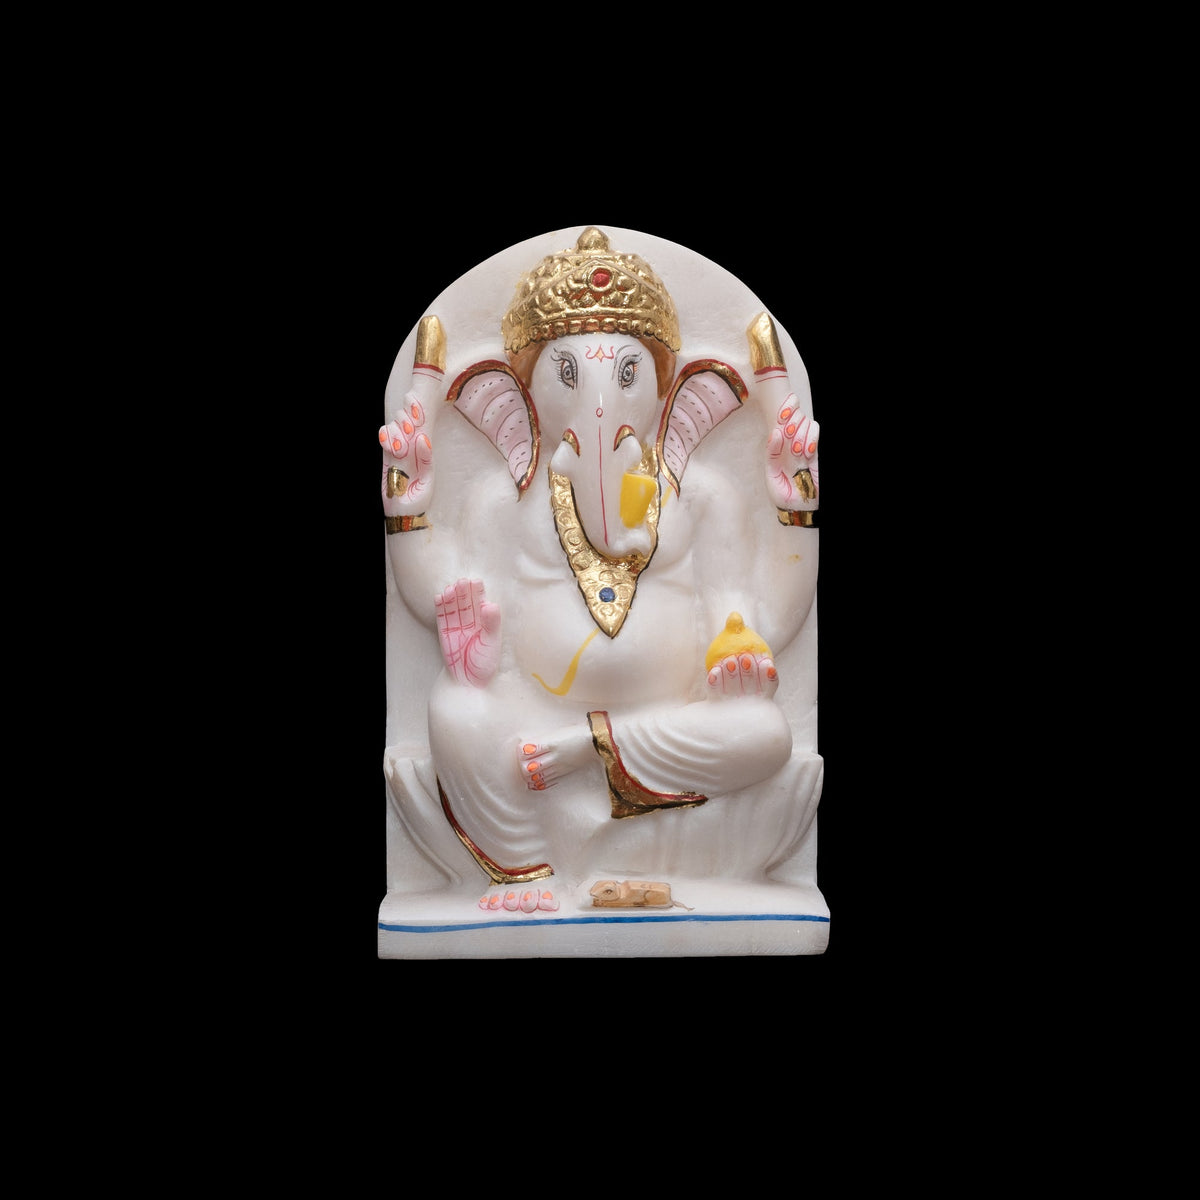 Ganesh Marble Statue In Framed Marble For Temple Home Office - 12 x 8 x 3 inches